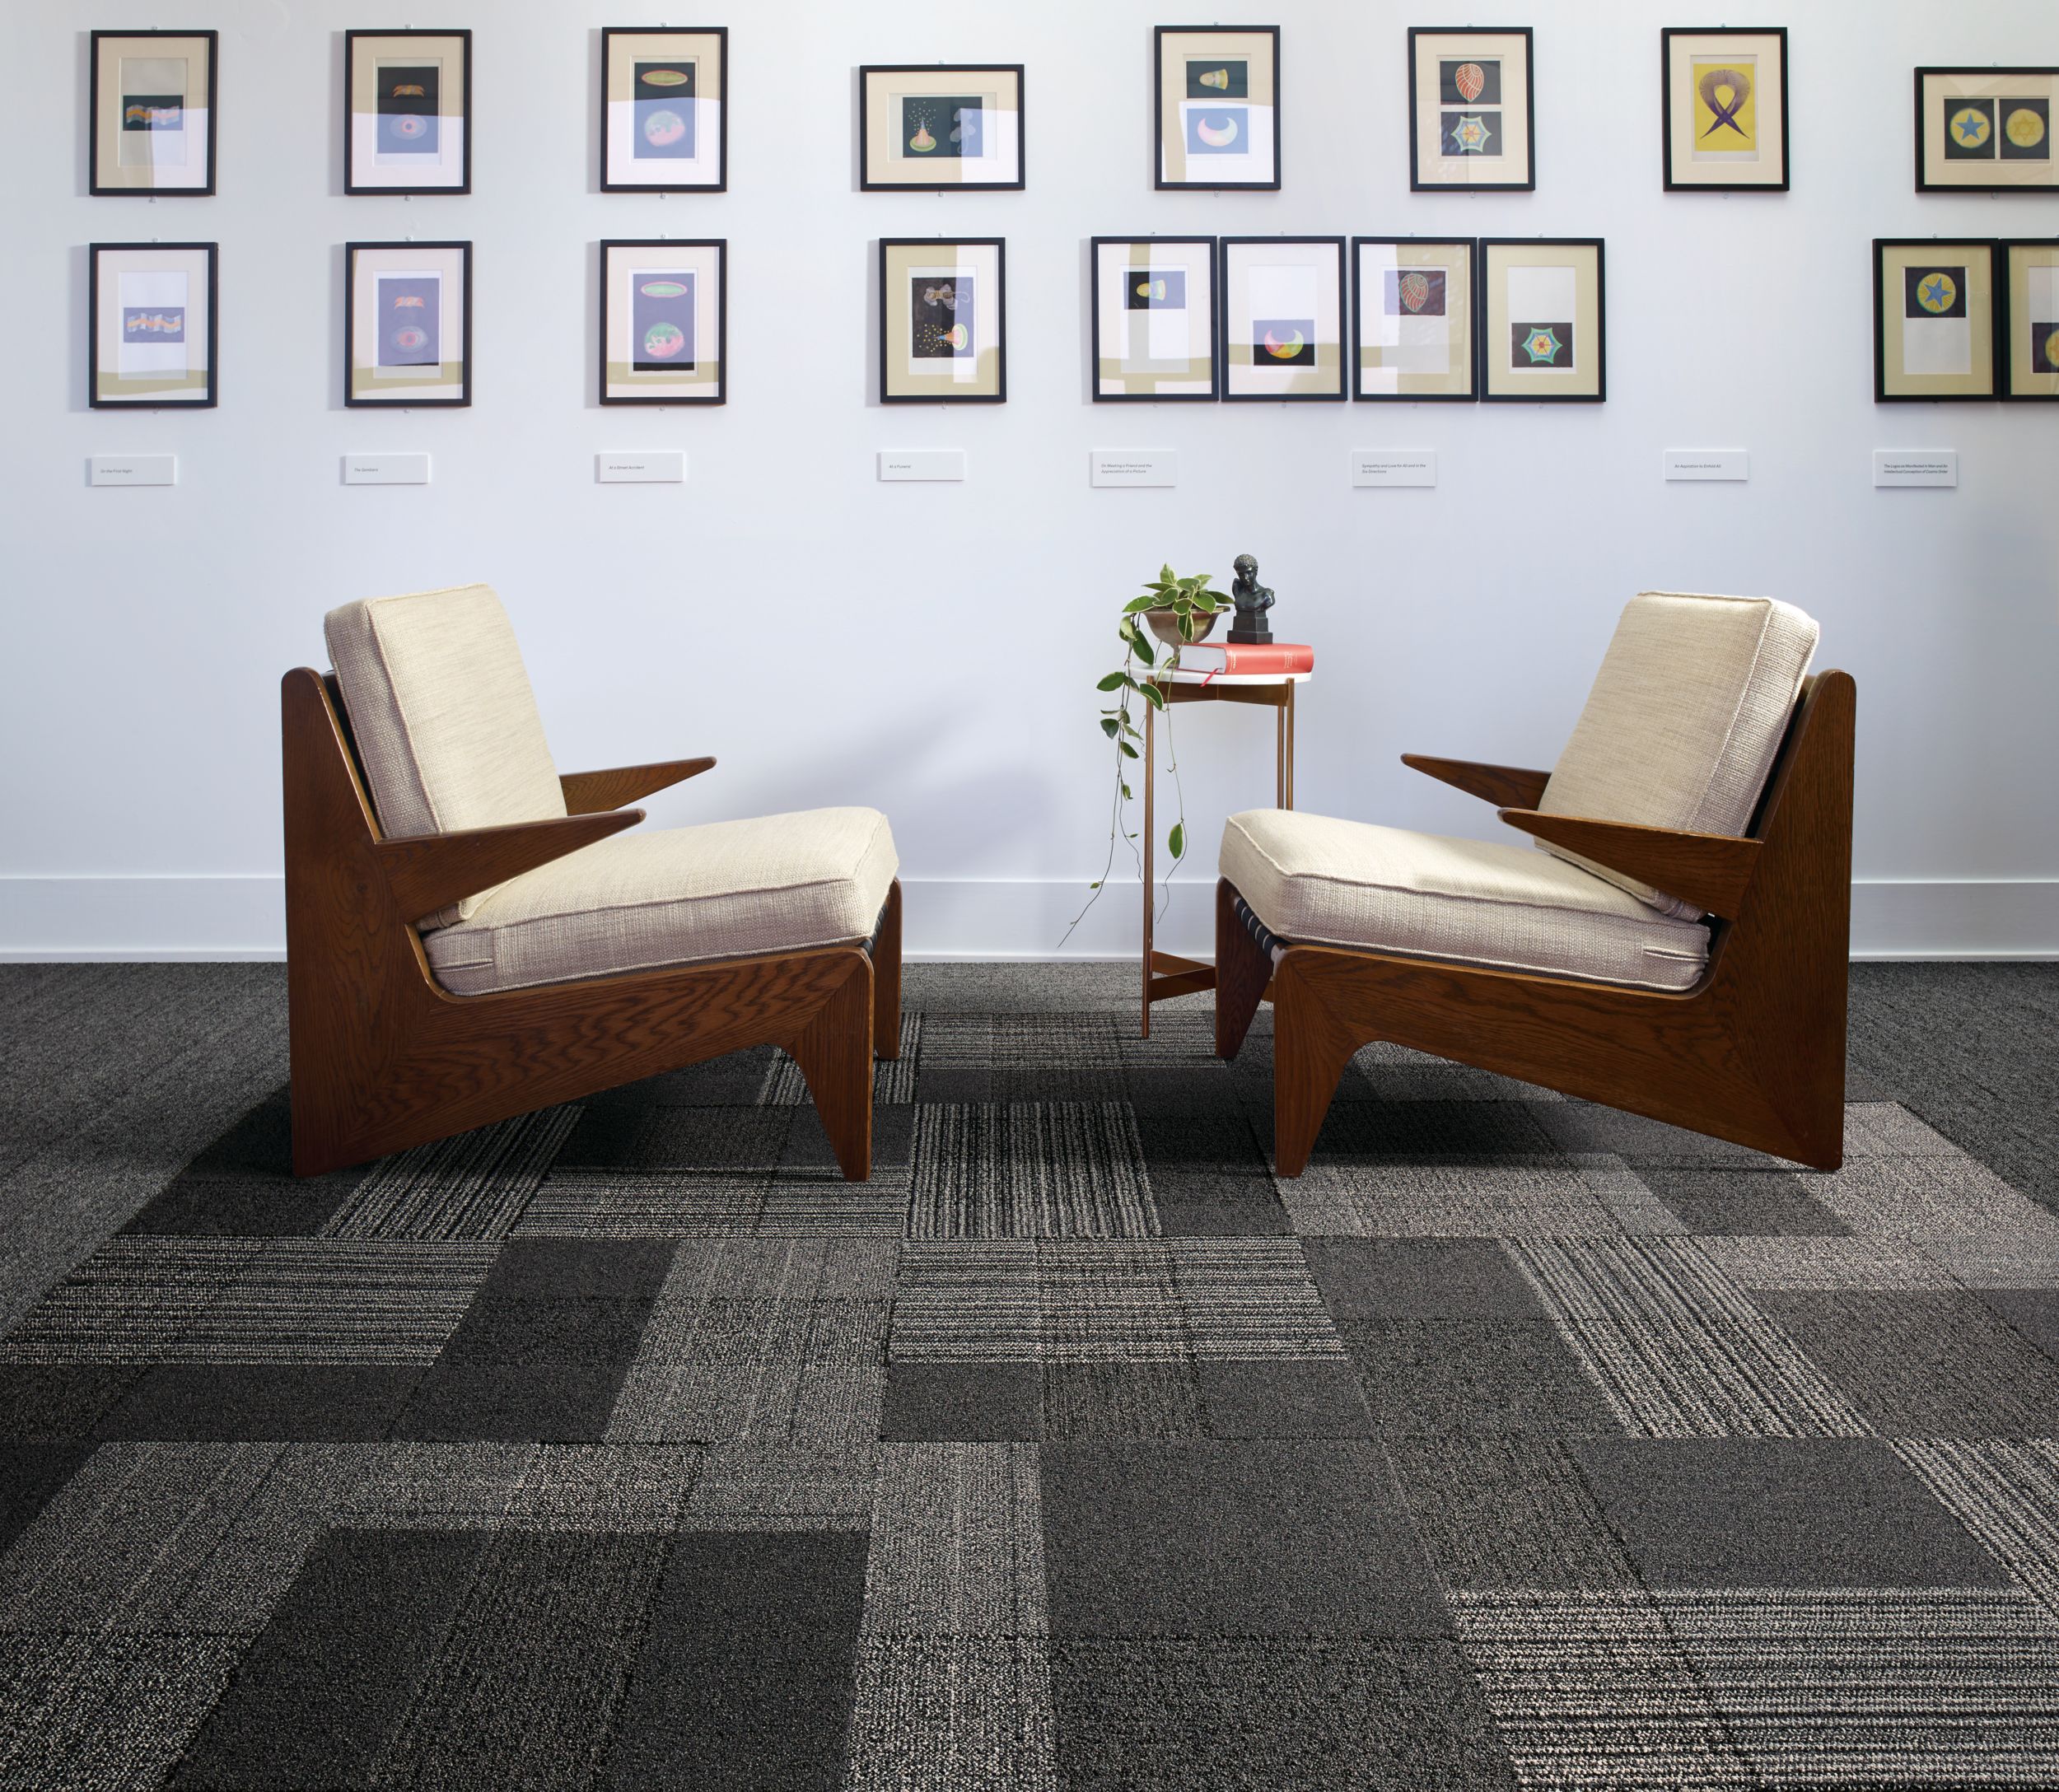 Interface ShadowBox Velour carpet tile and WW860 plank carpet tile in seating area with two chairs and a lot of small prints on the wall número de imagen 2